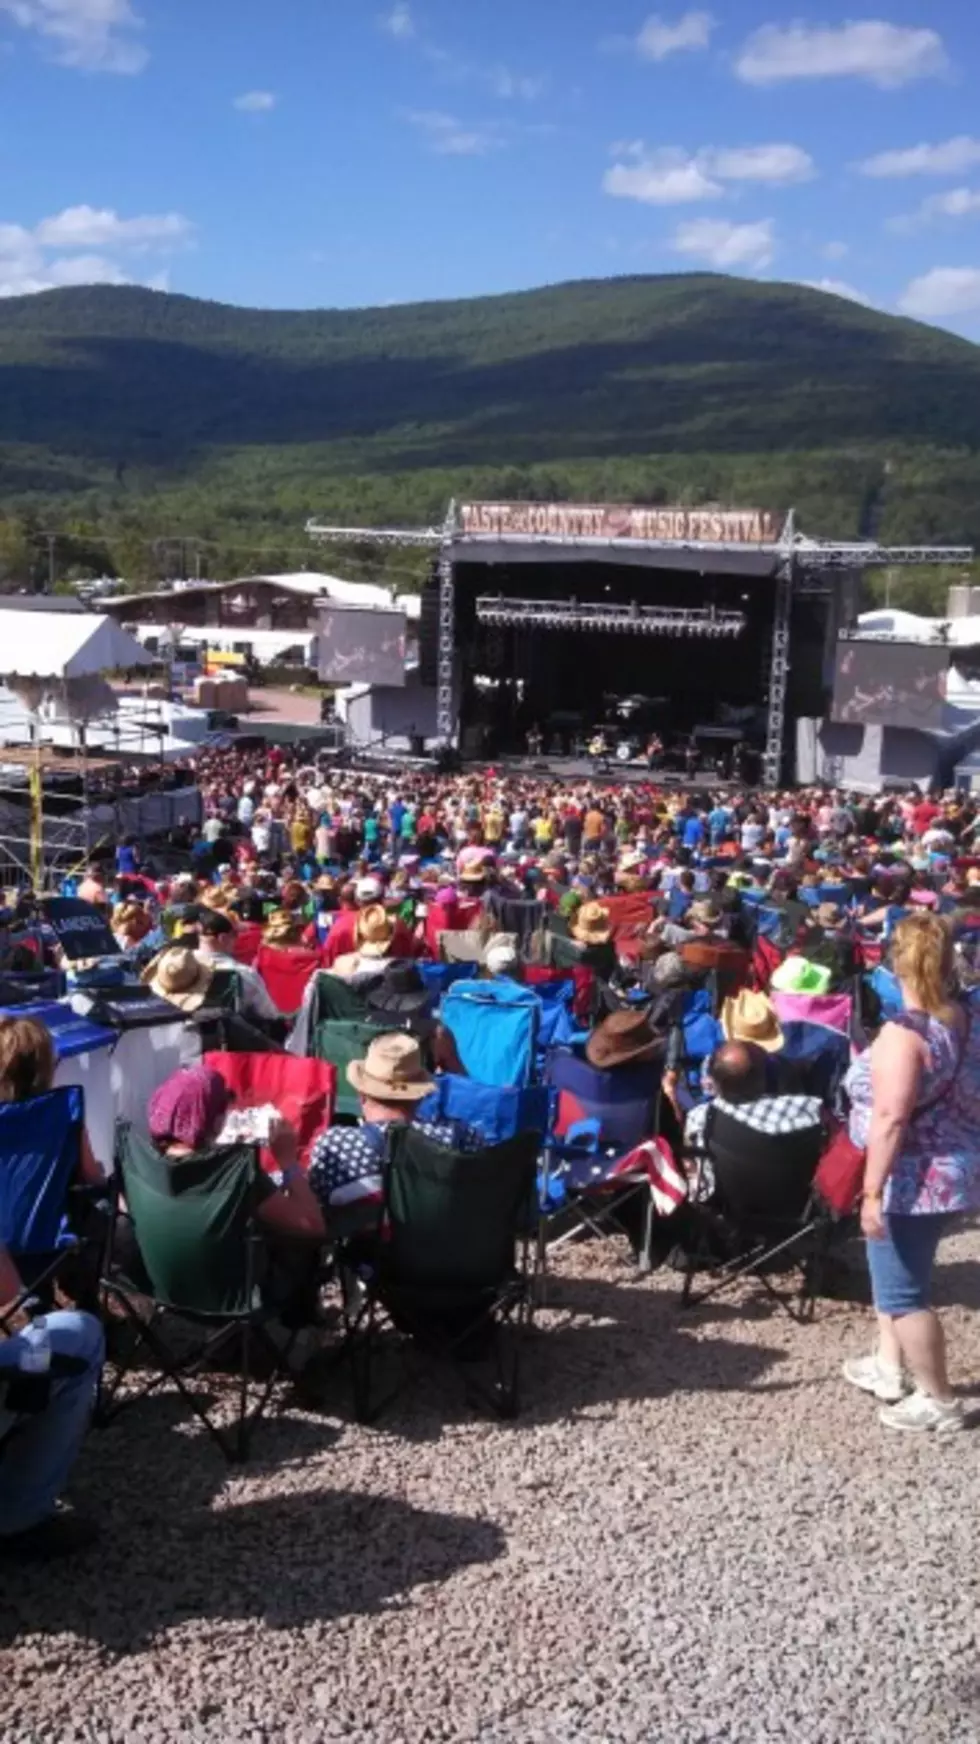 Taste Of Country Music Festival &#8211; Good Times At Hunter Mountain with WGNA